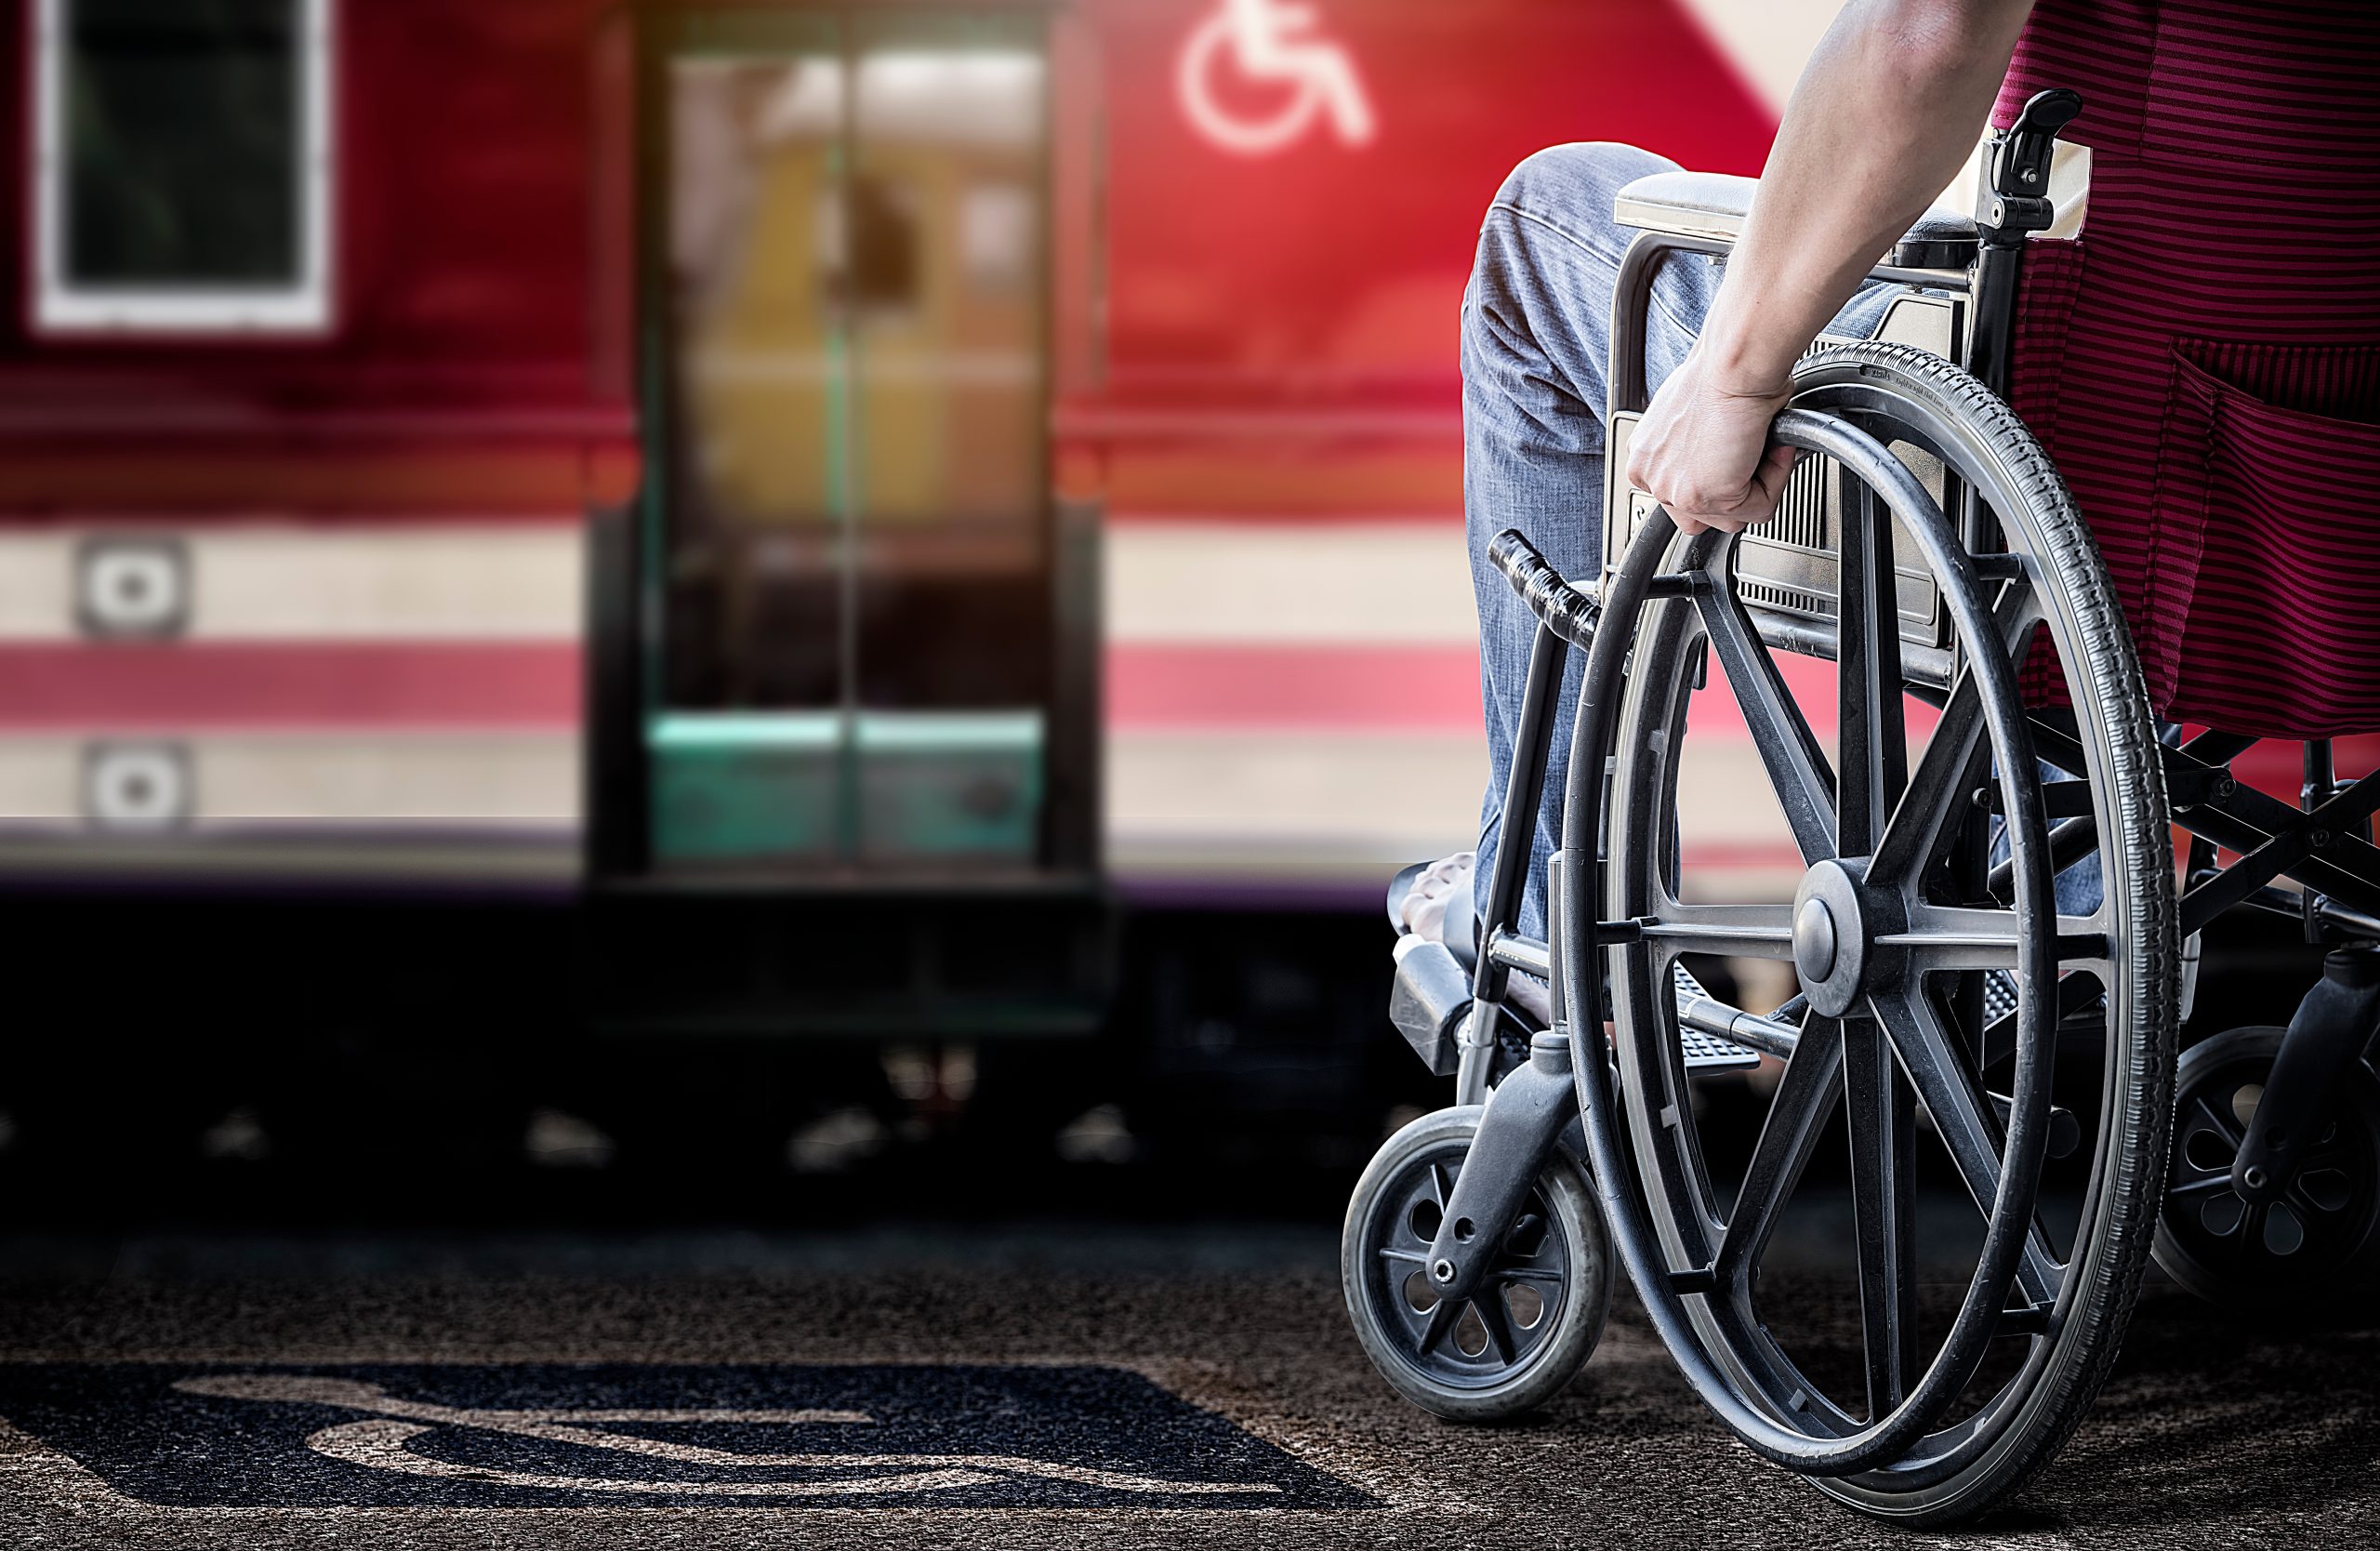 £5.3 million investment in innovative projects to make railways more accessible